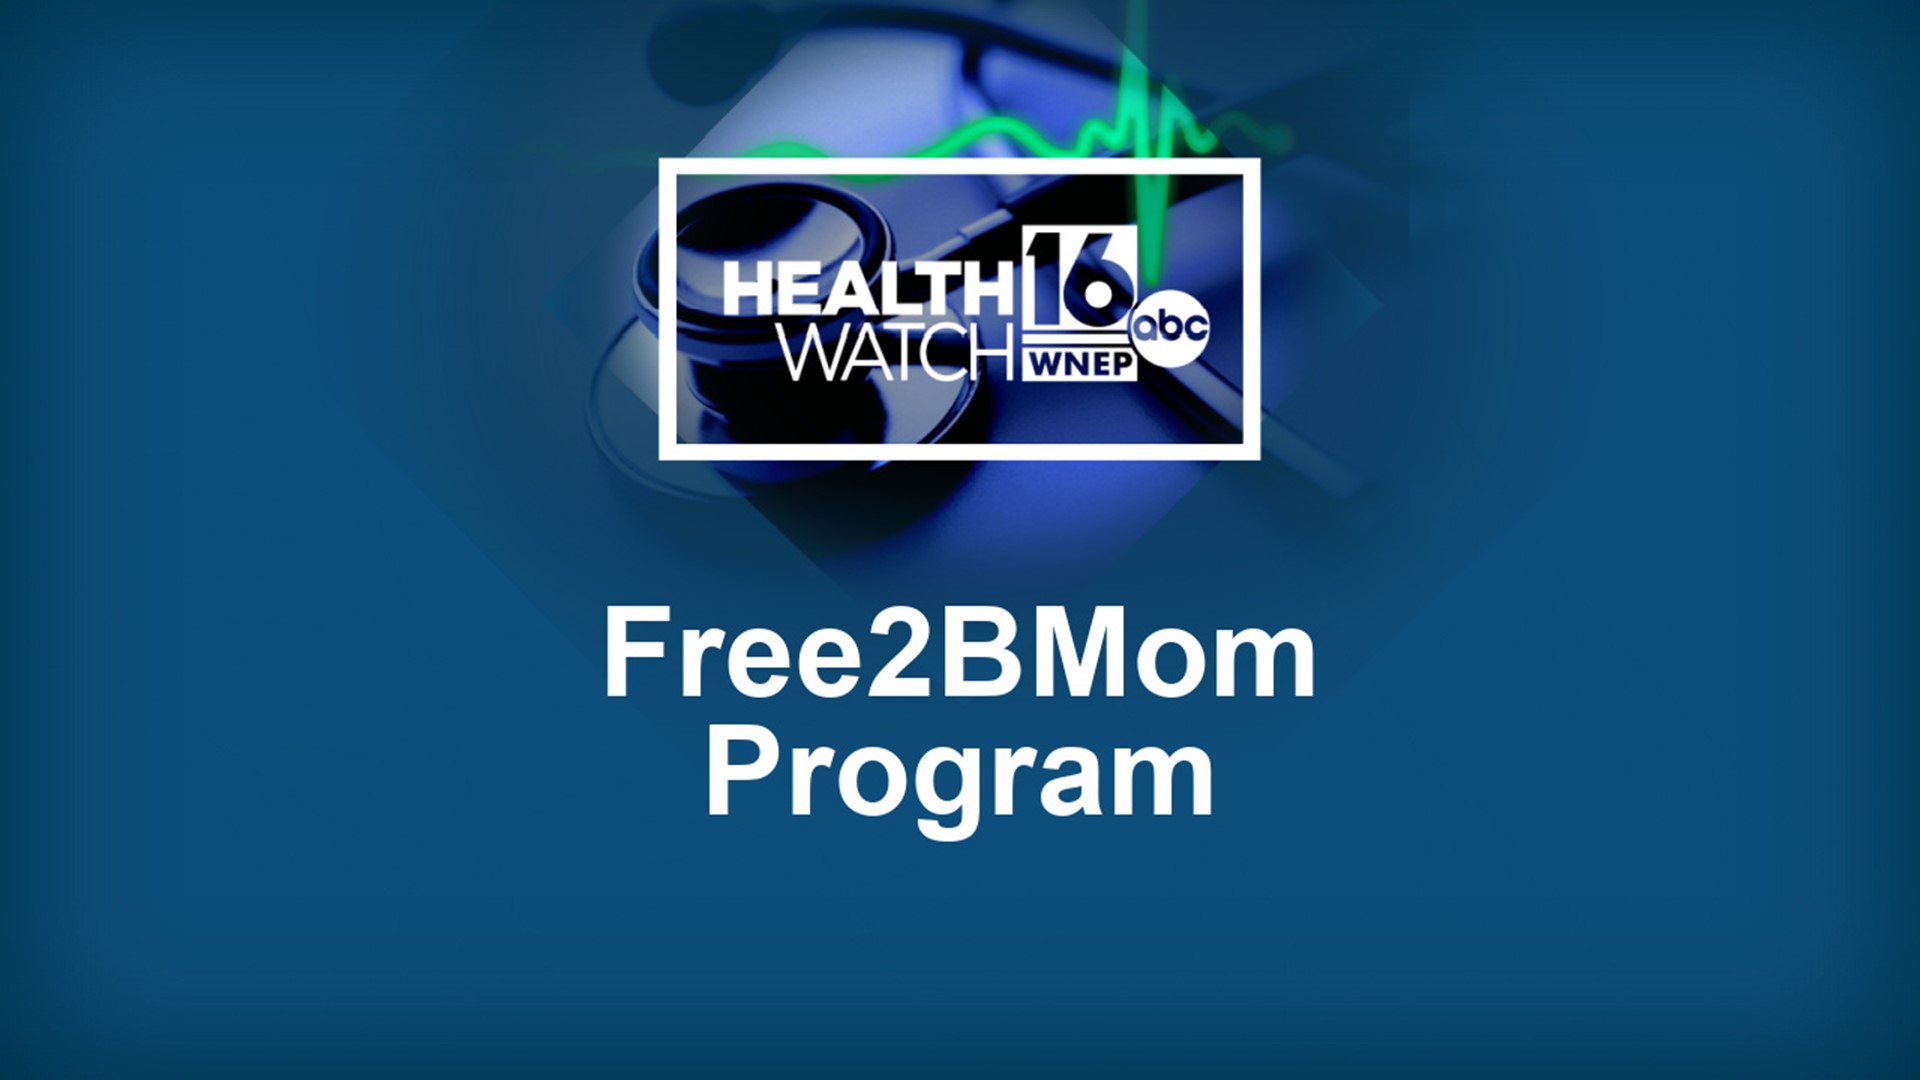 Geisinger Health System launched a program more than a year ago called Free2BMom—a new way to care for new moms and help them succeed through recovery.